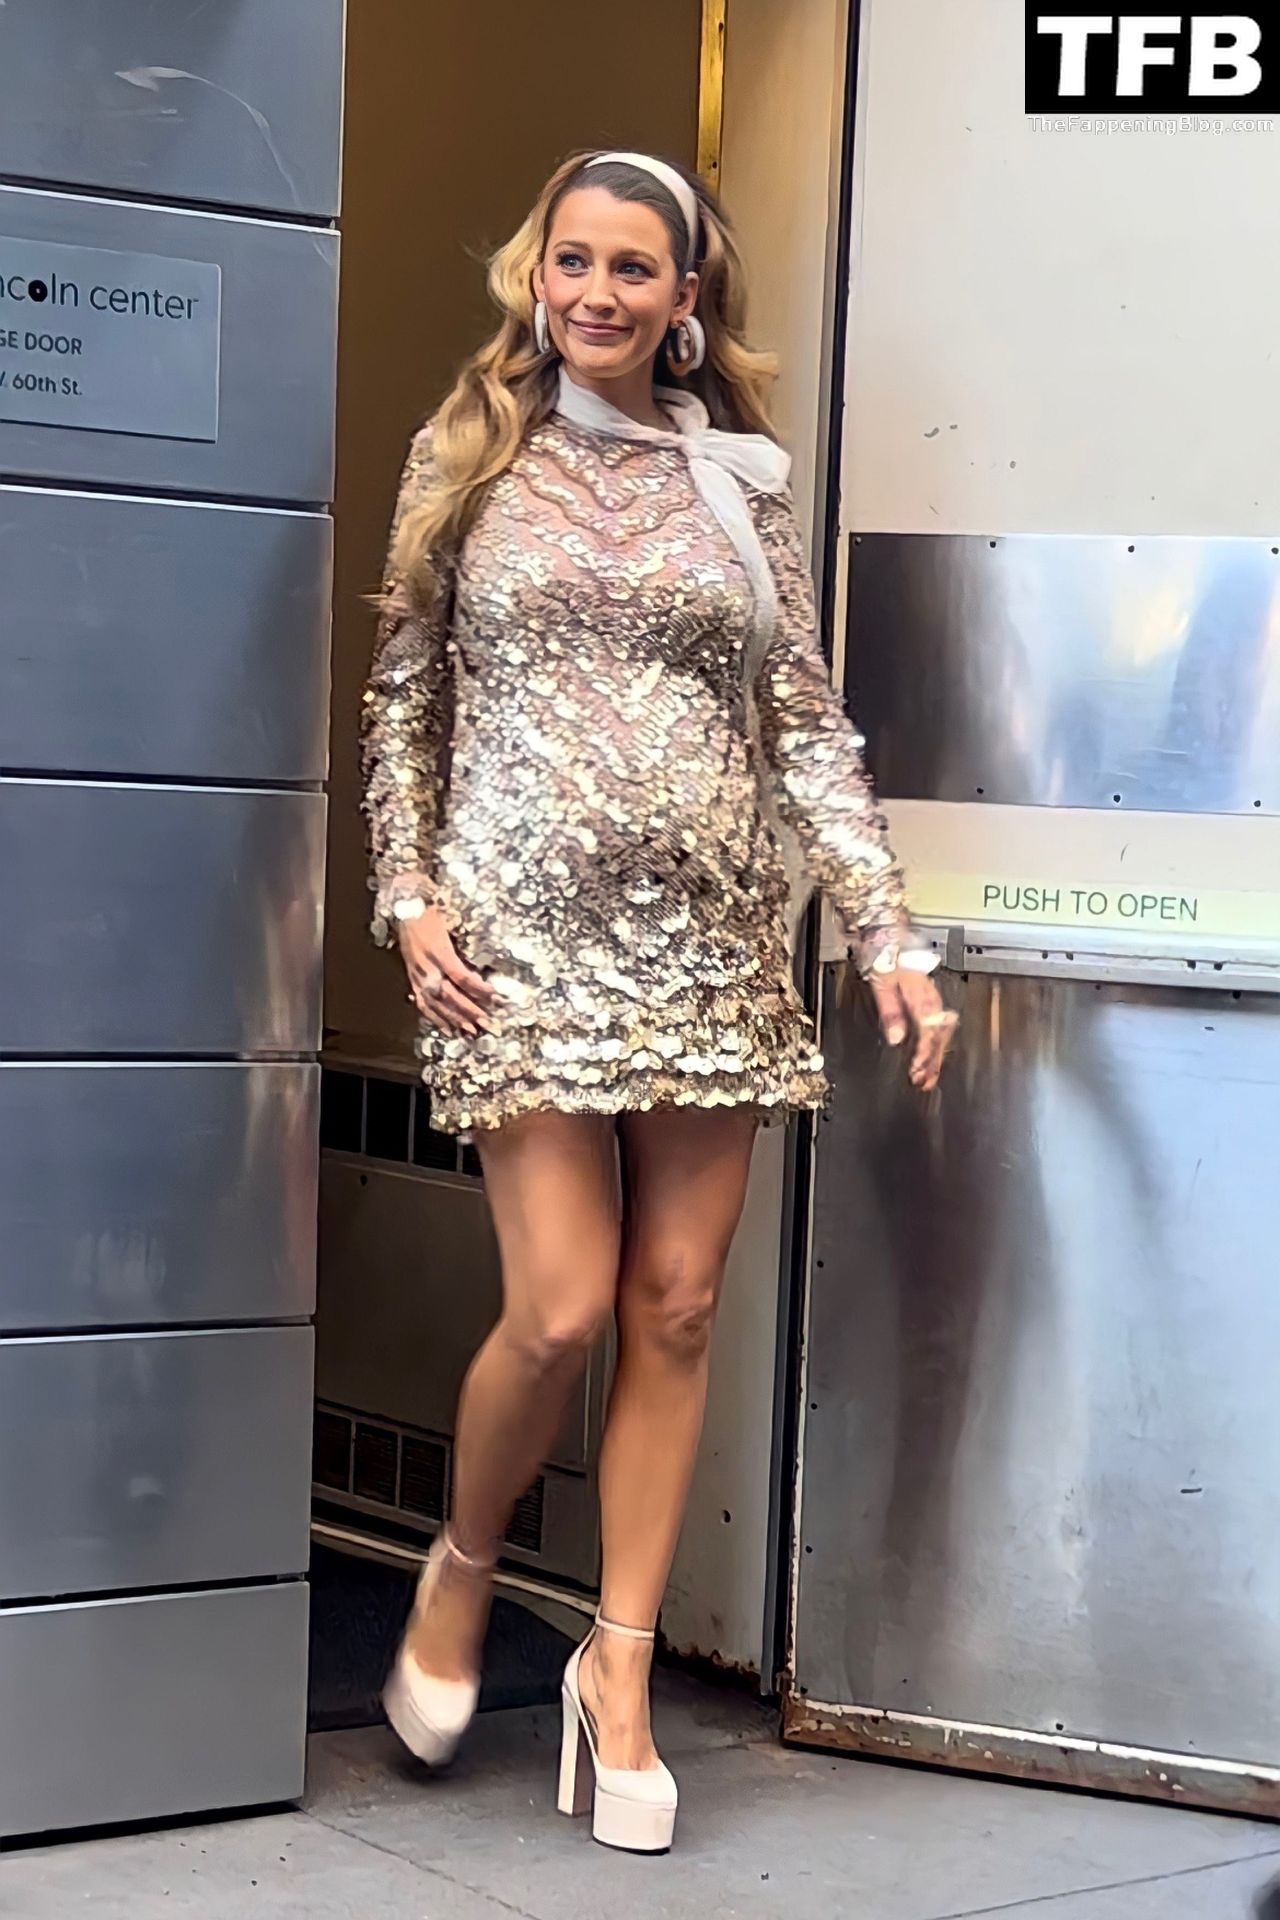 Leggy Blake Lively Exits Forbes Summit After Announcing Fourth Pregnancy (68 Photos)